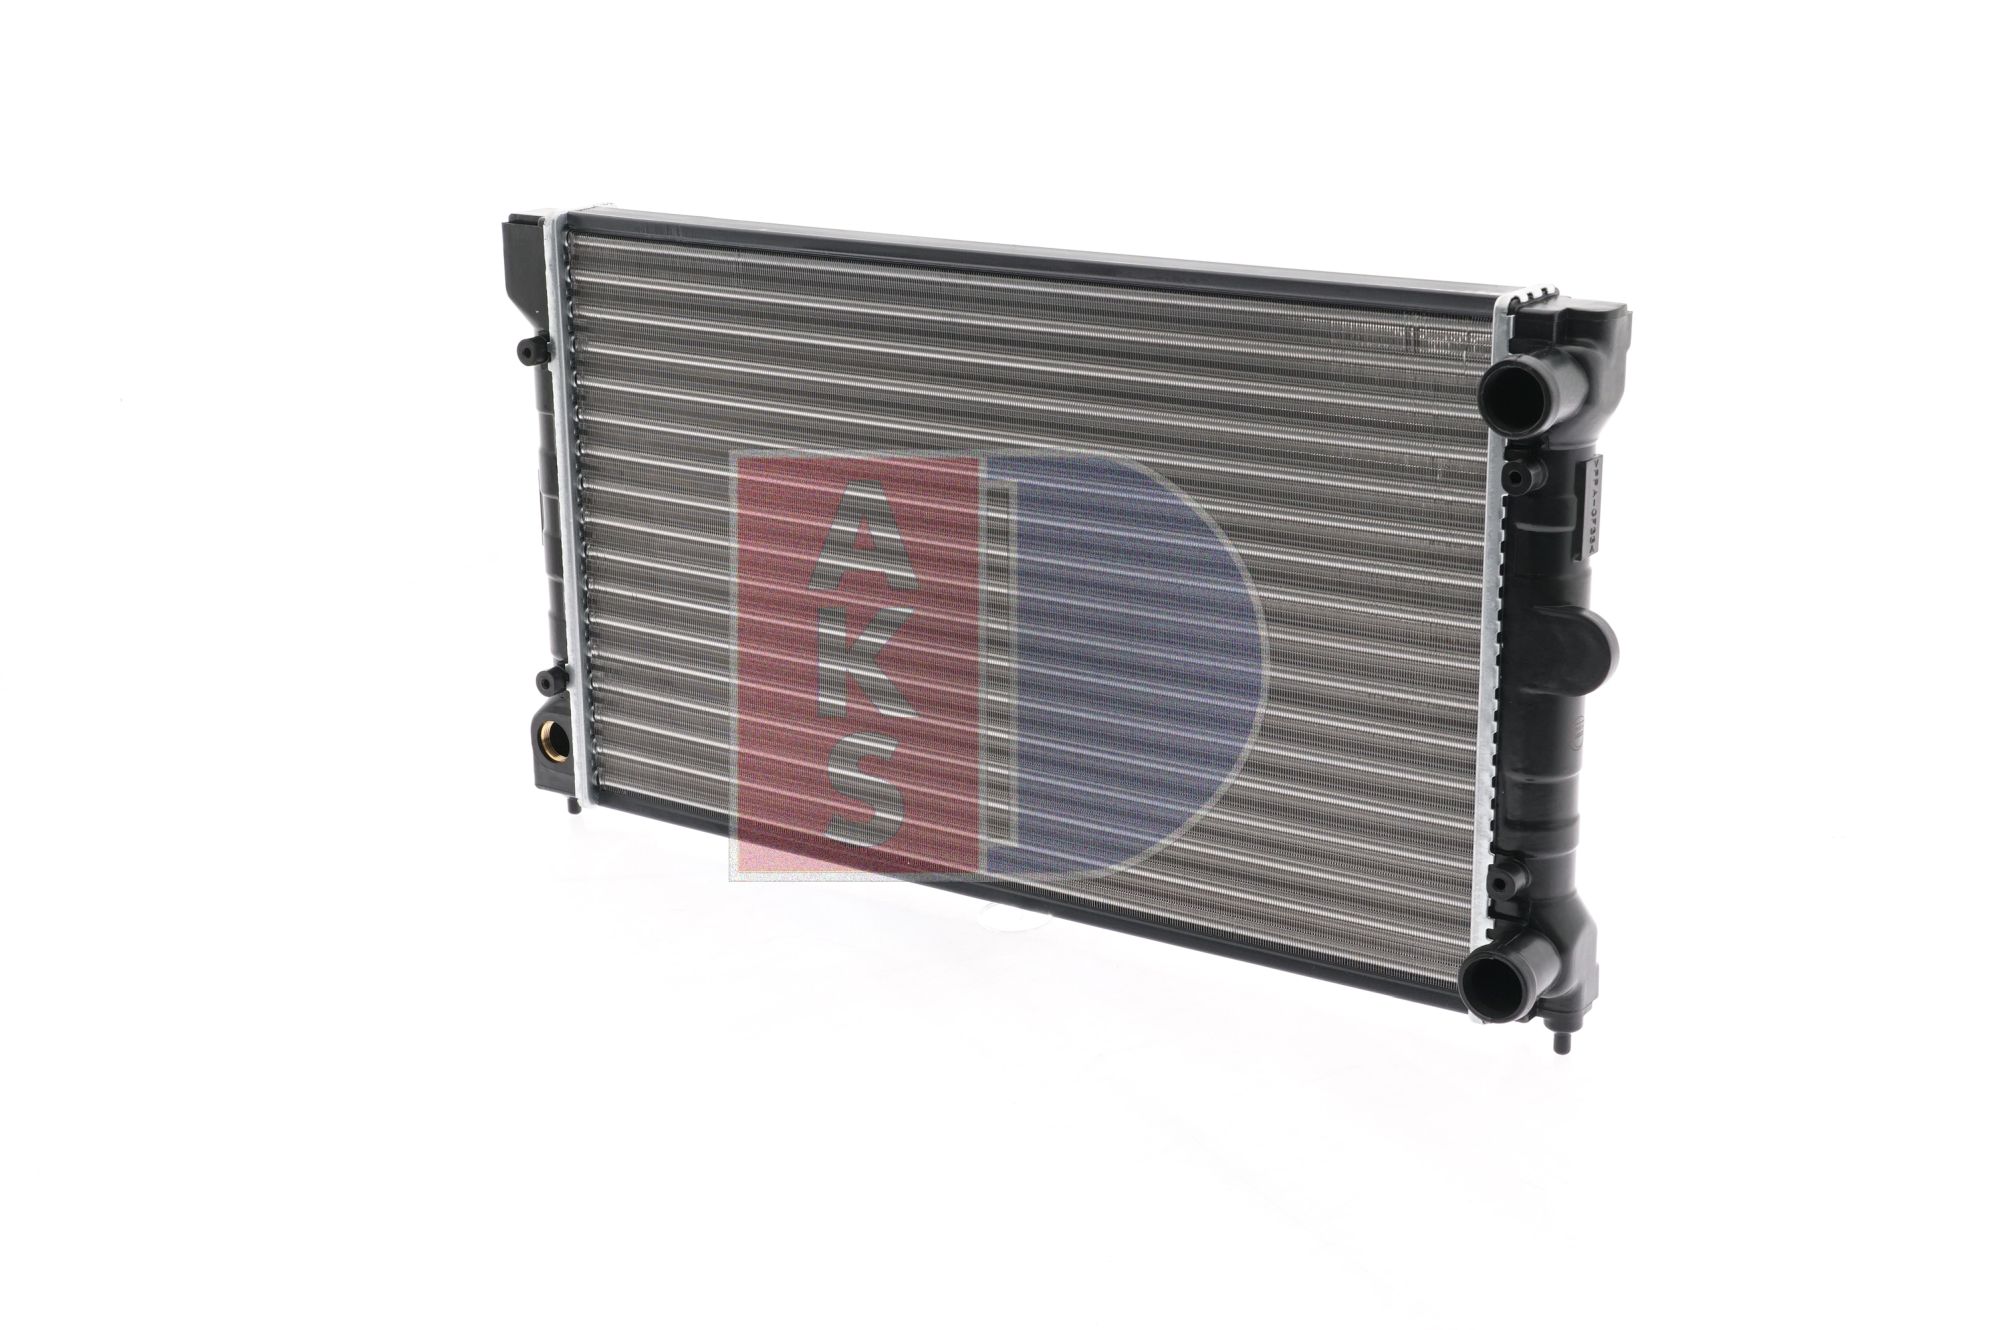 AKS DASIS 040680N Engine radiator 520 x 320 x 34 mm, Mechanically jointed cooling fins